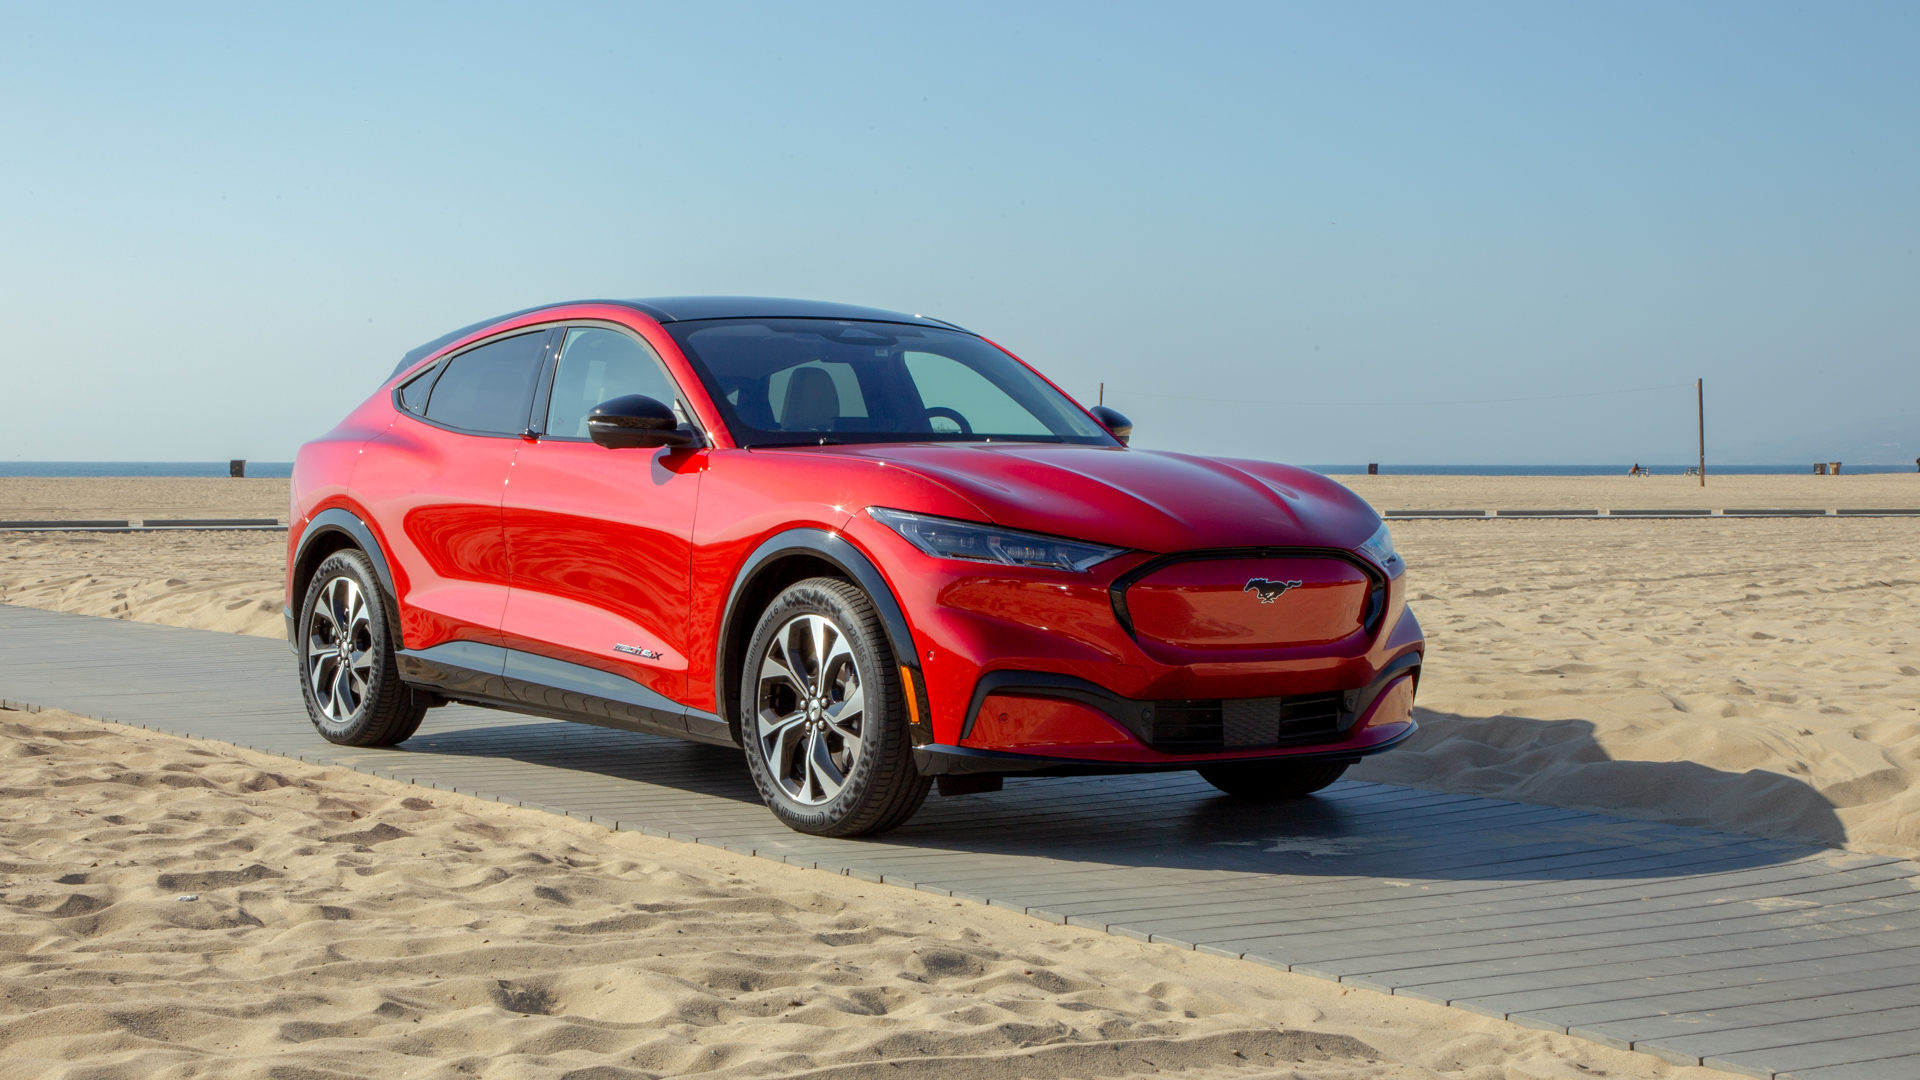 2021 Ford Mustang Mach-E Electric SUV Revealed With Serious Performance ...